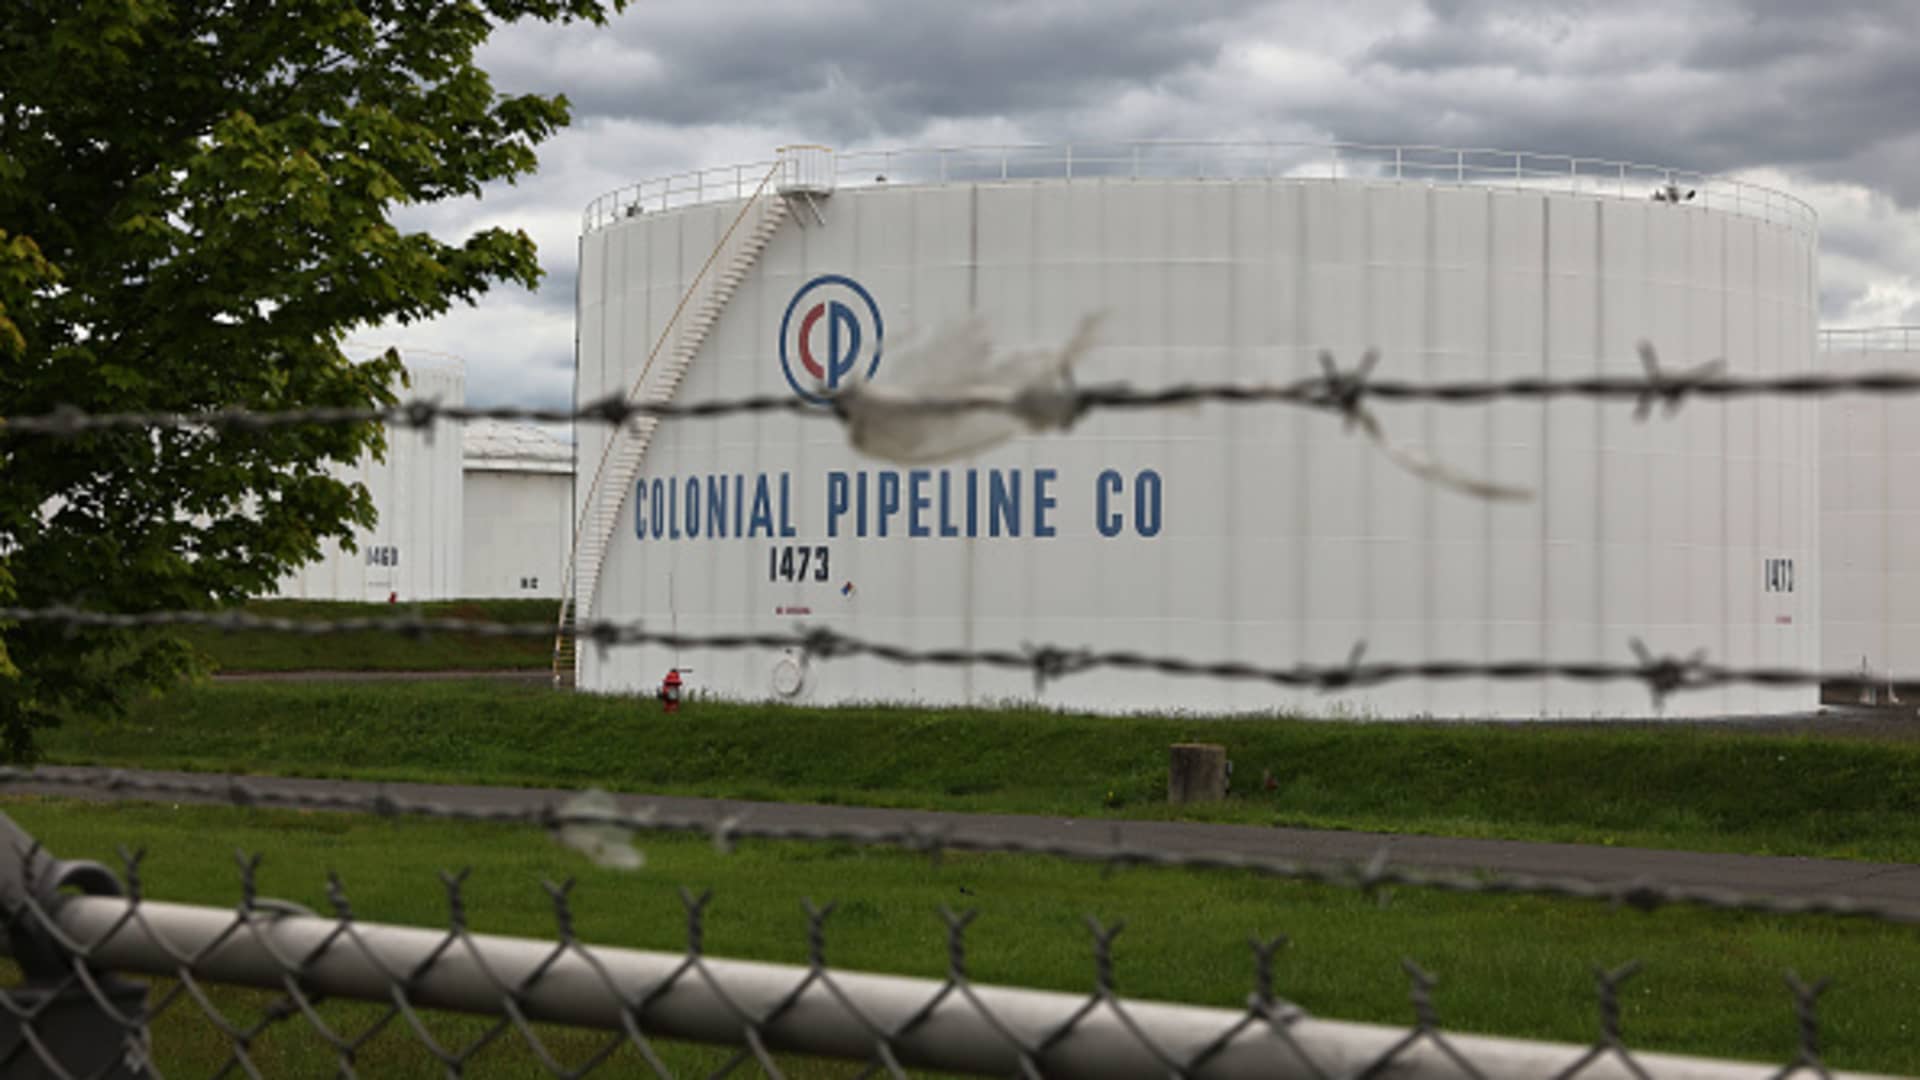 Fuel holding tanks are seen at Colonial Pipeline's Linden Junction Tank Farm on May 10, 2021 in Woodbridge, New Jersey.